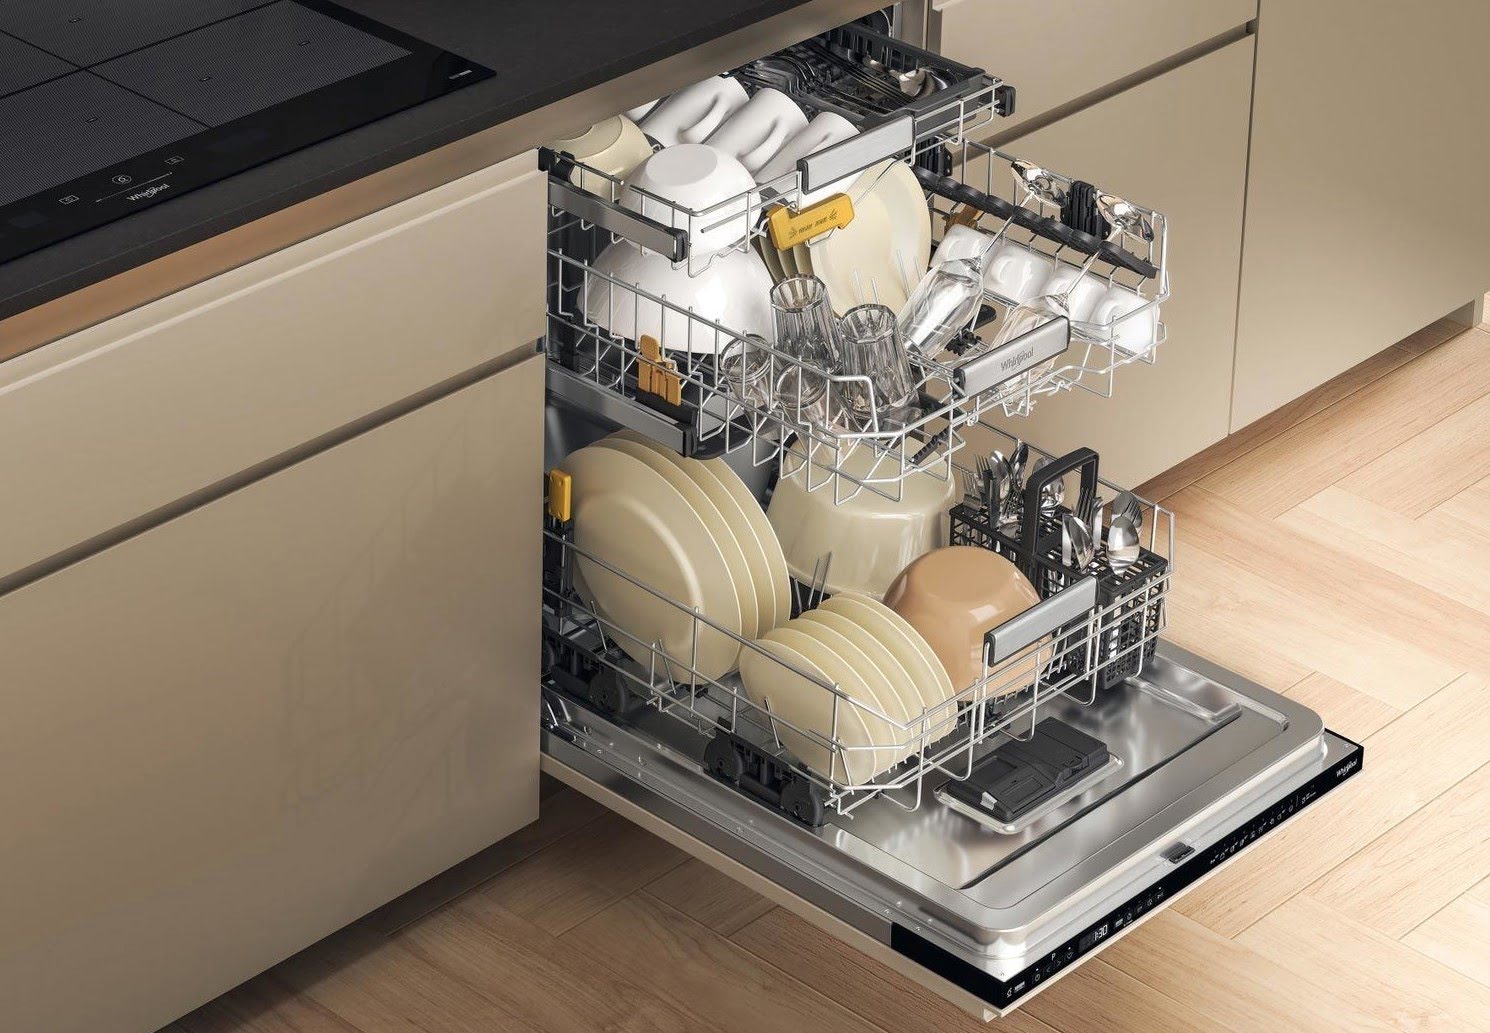 How To Fix The Error Code 45079 For Whirlpool Dishwasher